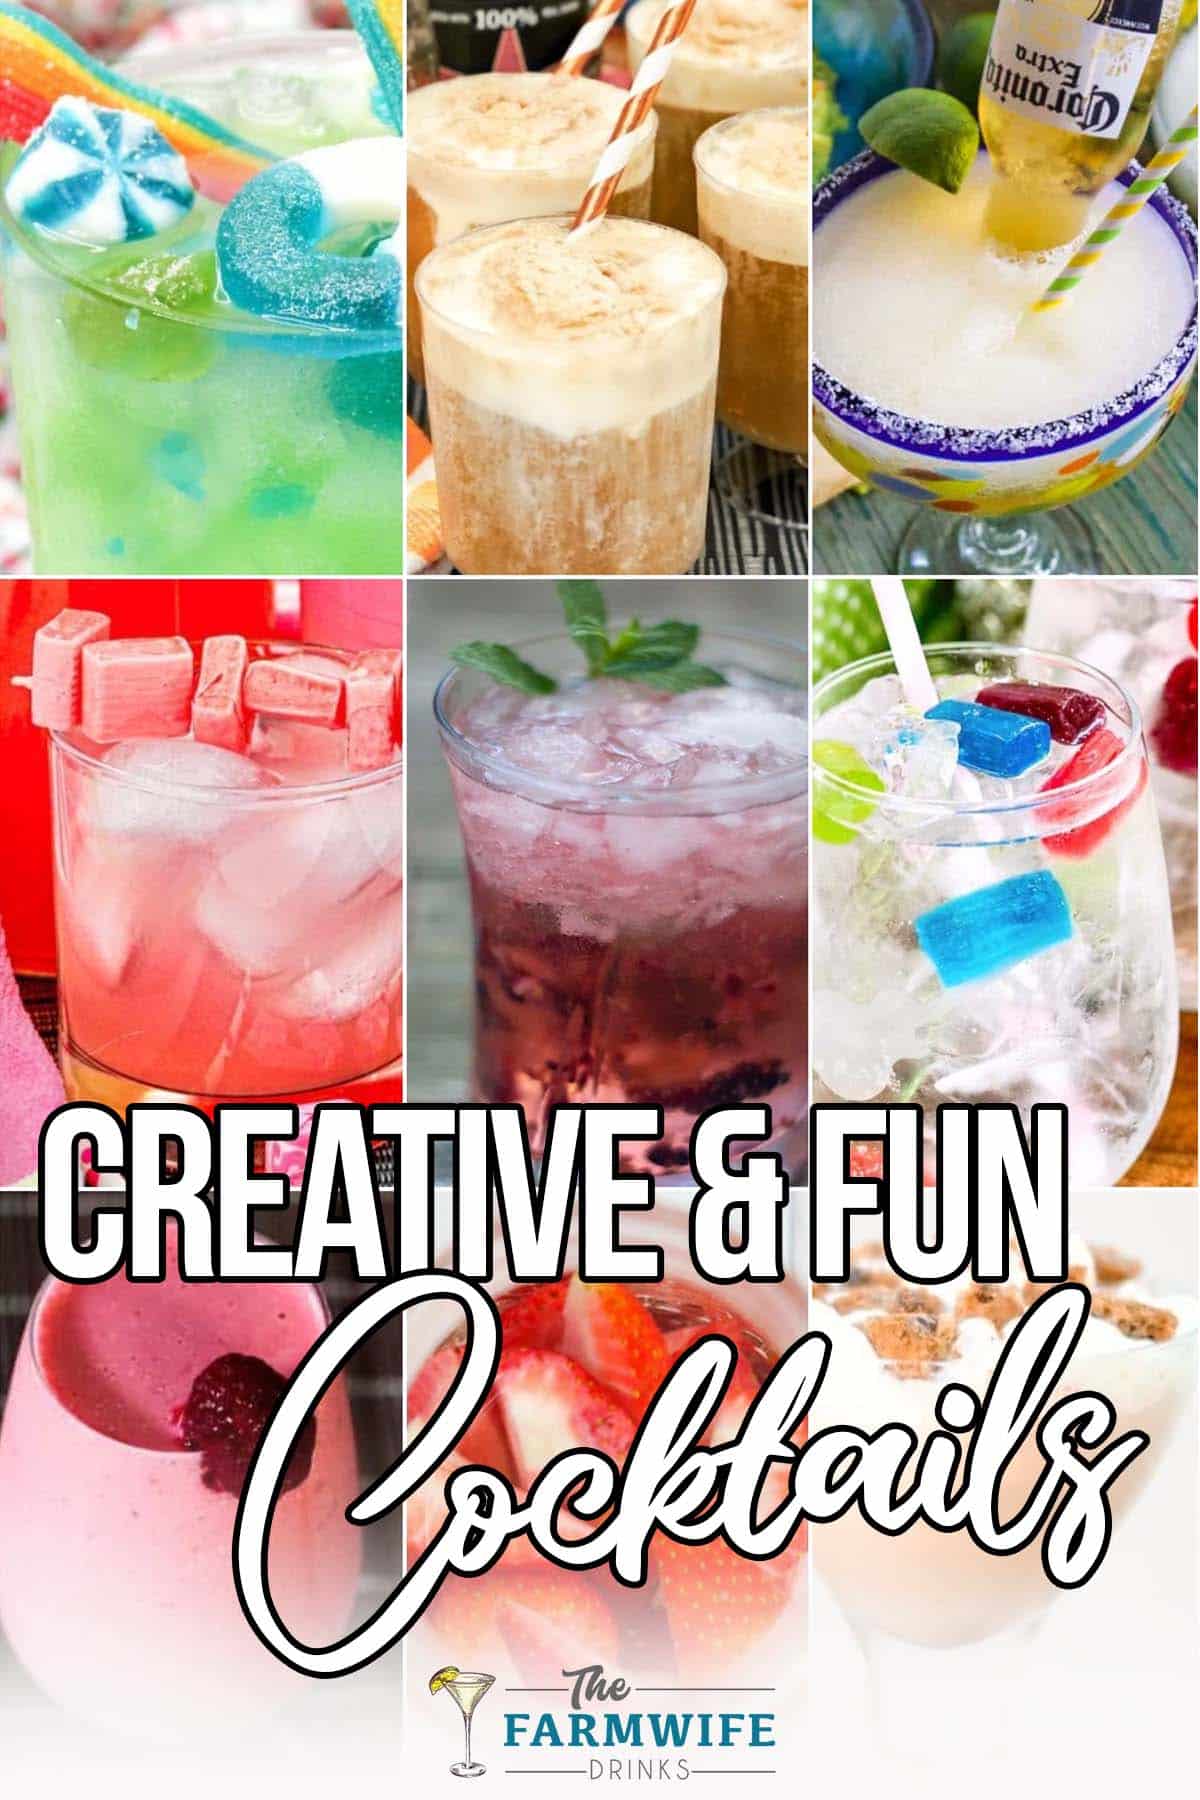 photo collage of creative cocktail recipes with text which reads creative & fun cocktails